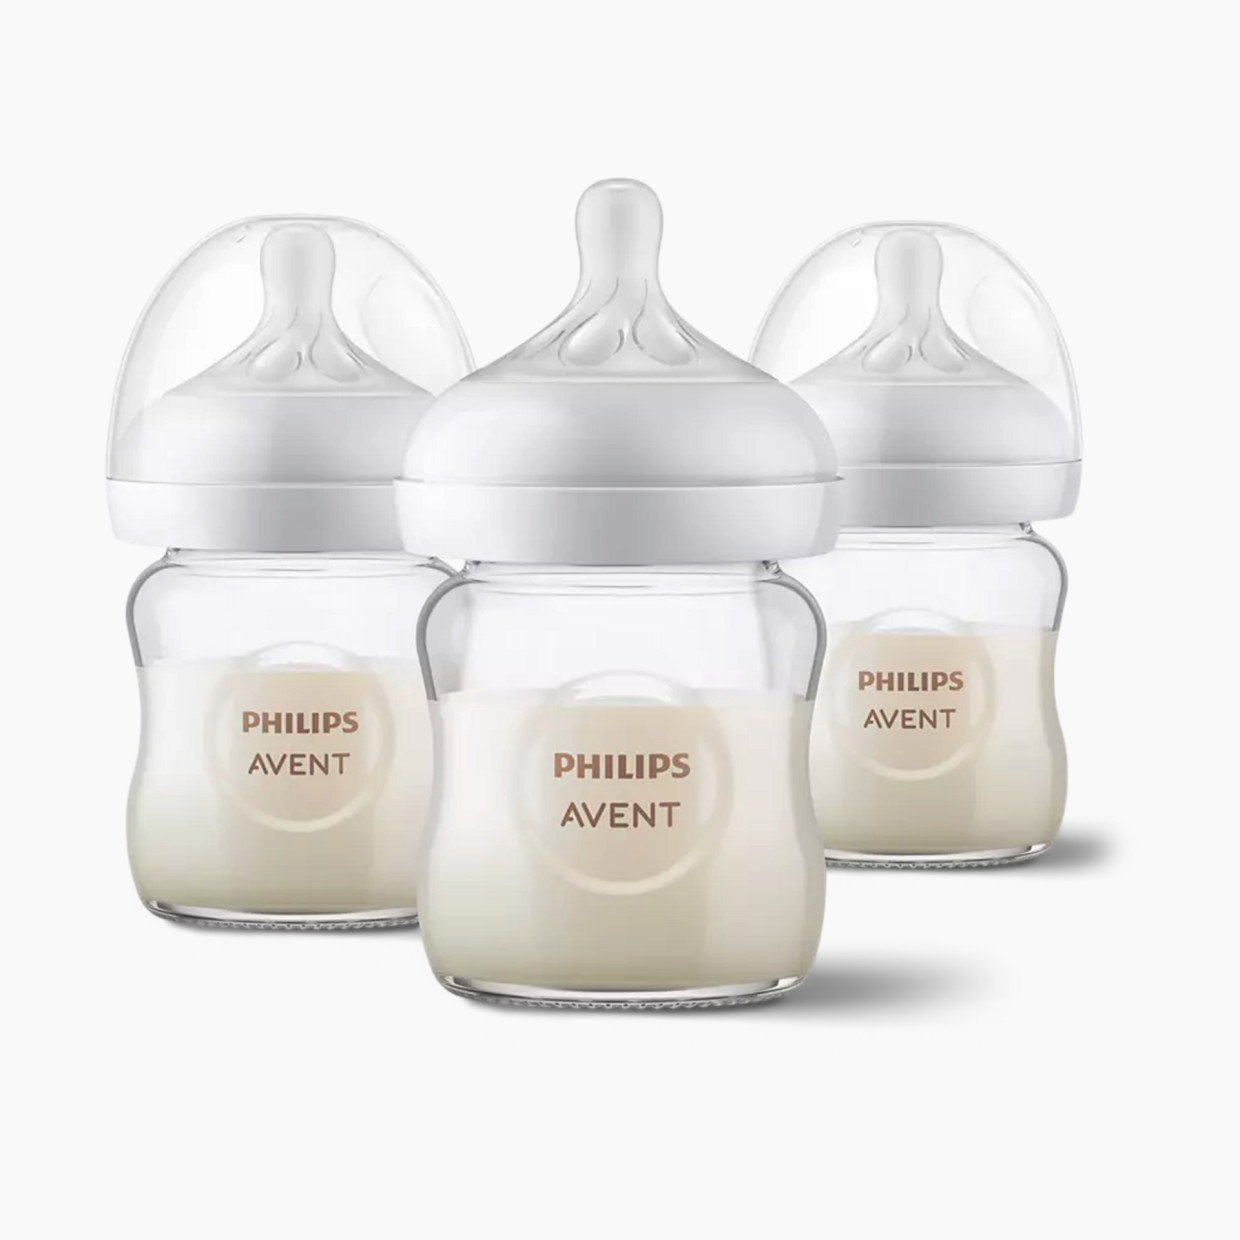 Philips AVENT Anti-Colic Baby Bottles Clear, 4 Oz